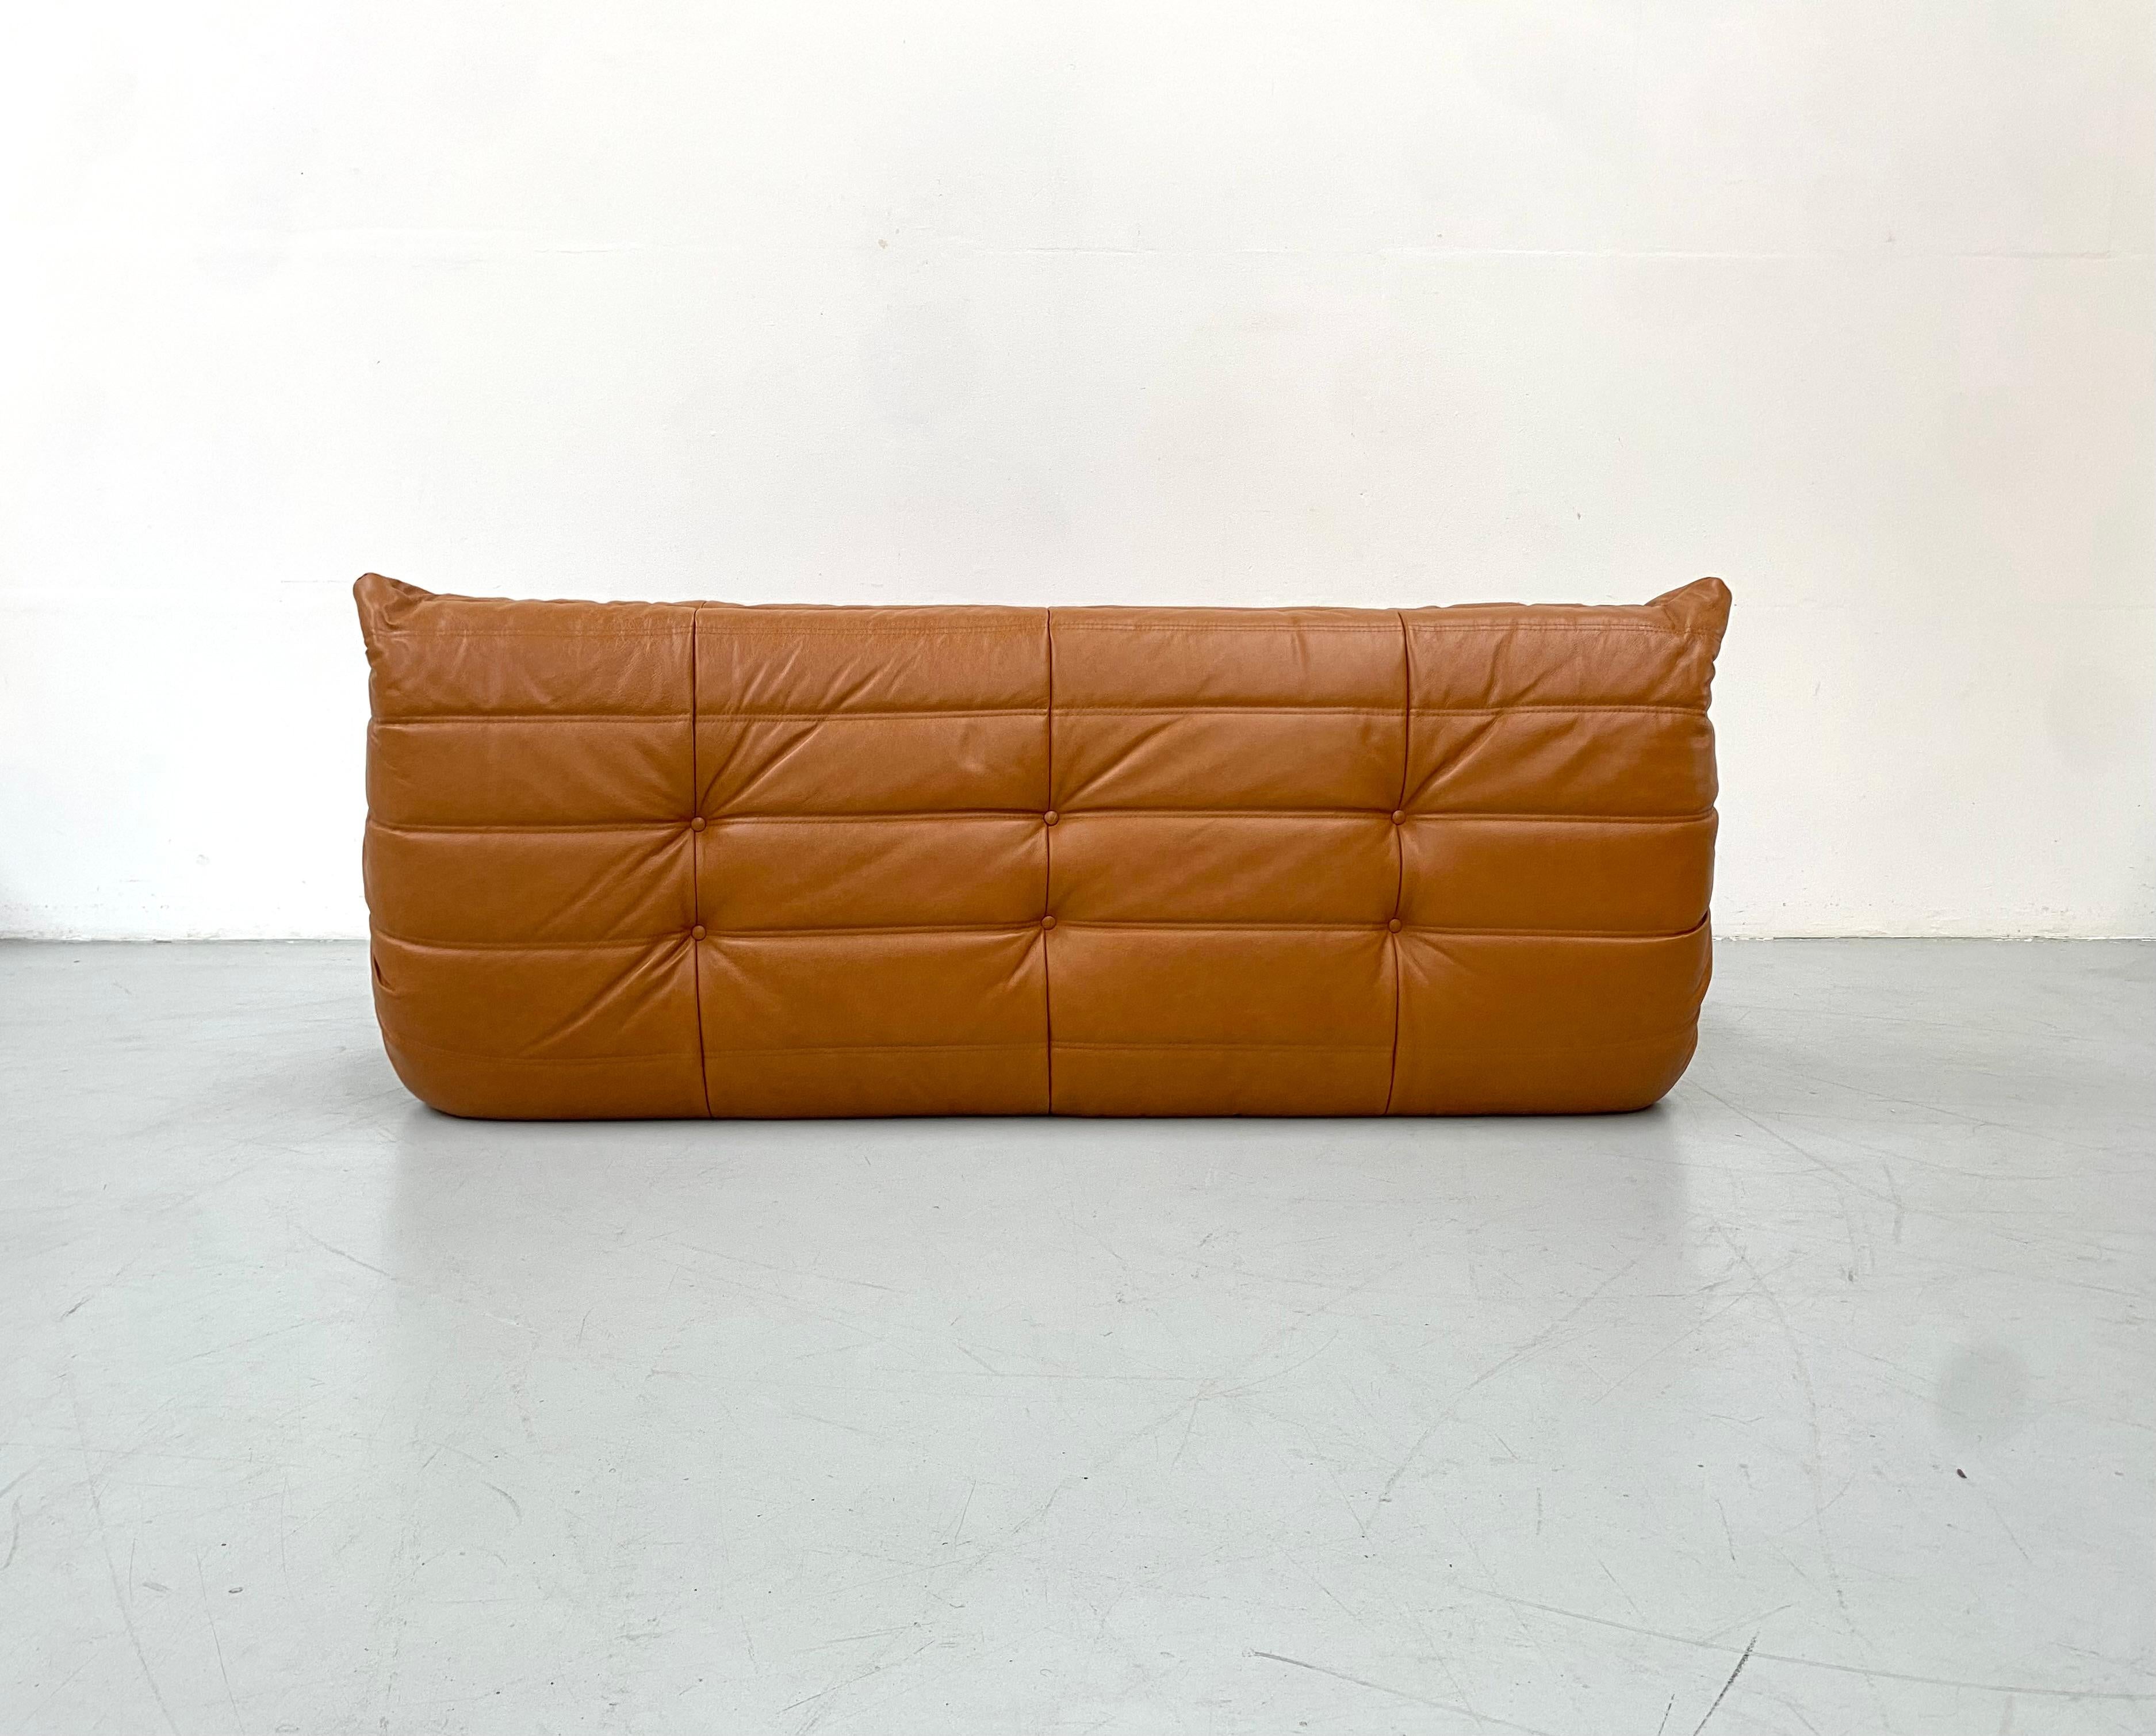 French Vintage Togo Sofa in Brown Leather by Michel Ducaroy for Ligne Roset. For Sale 1